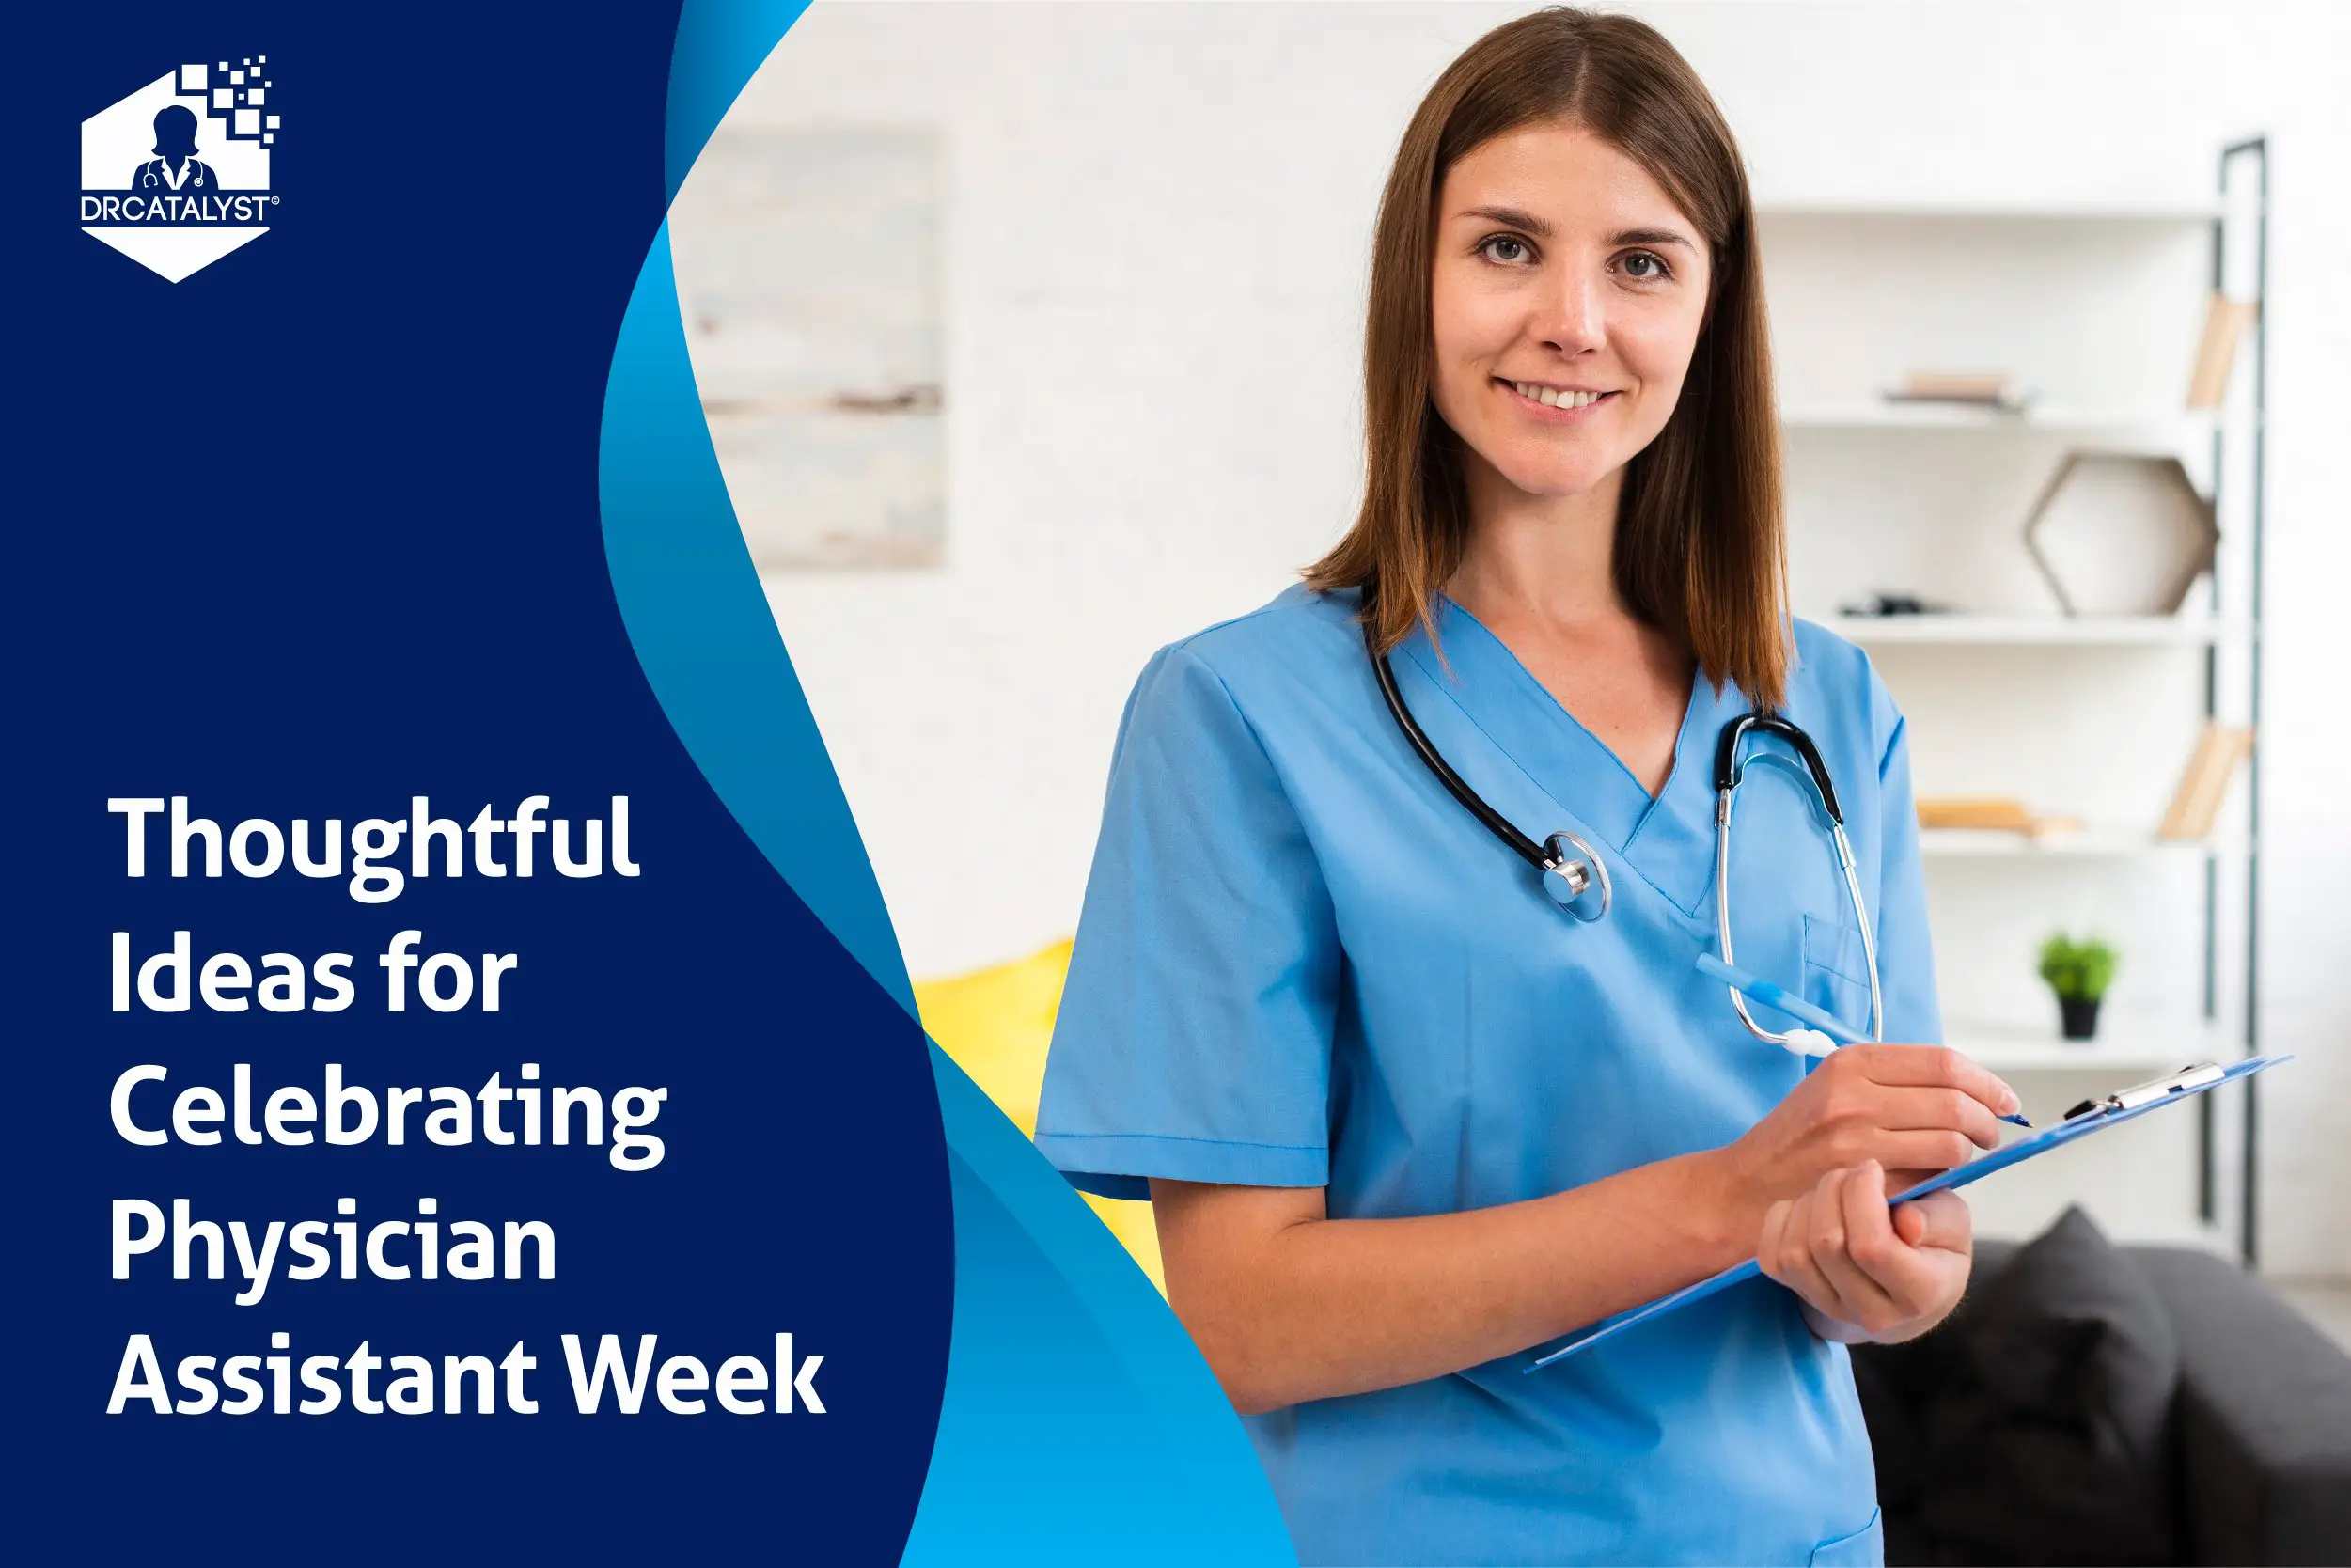 Thoughtful Ideas for Celebrating Physician Assistant Week